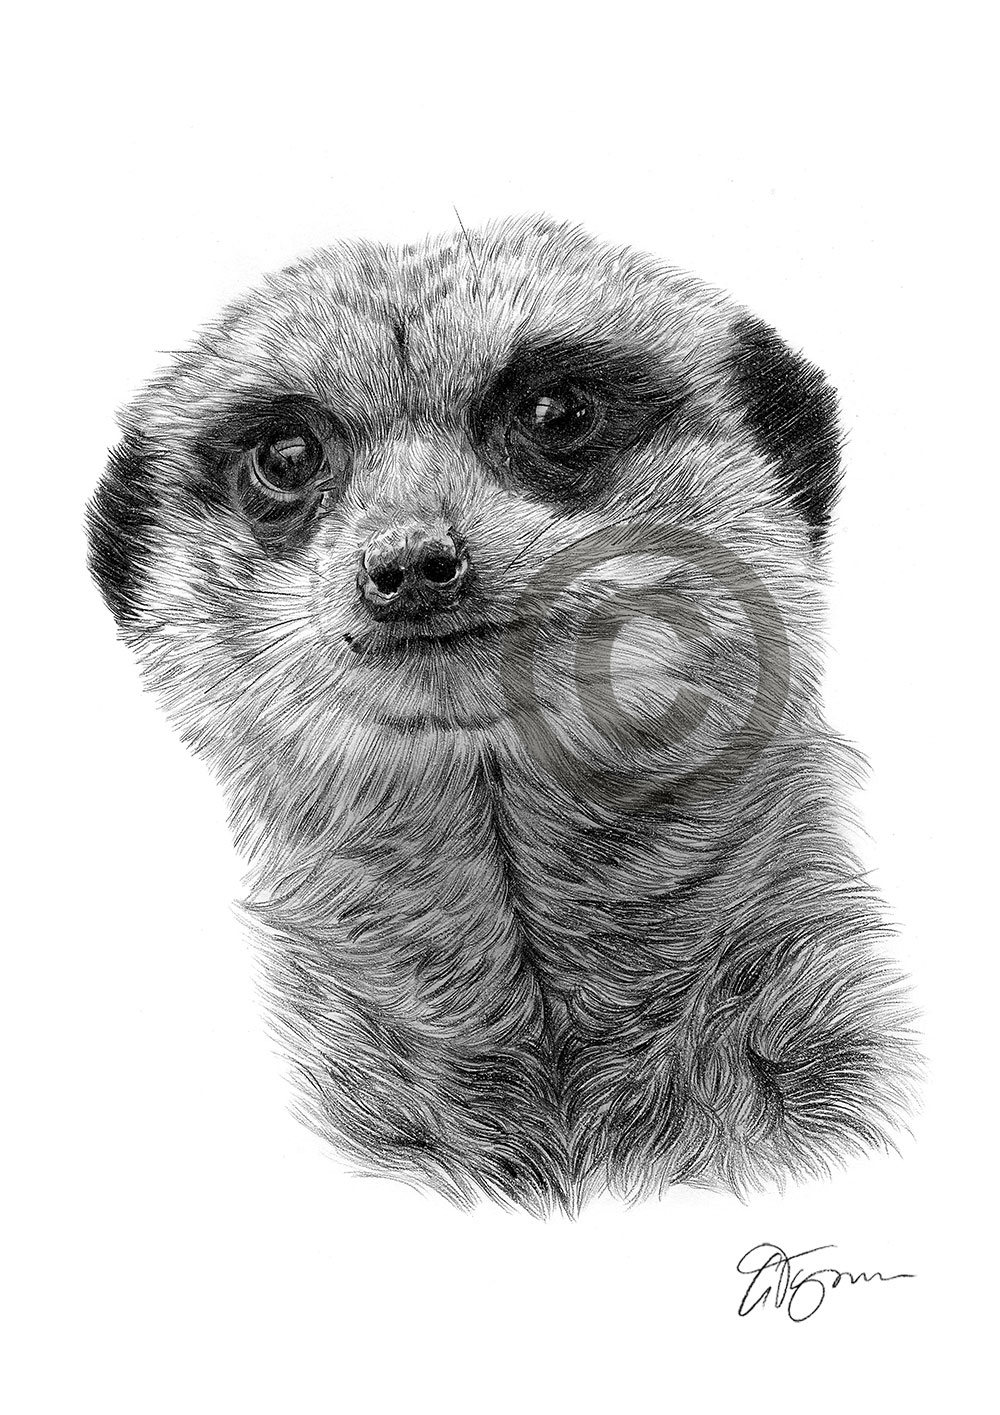 Pencil drawing of a meerkat by artist Gary Tymon